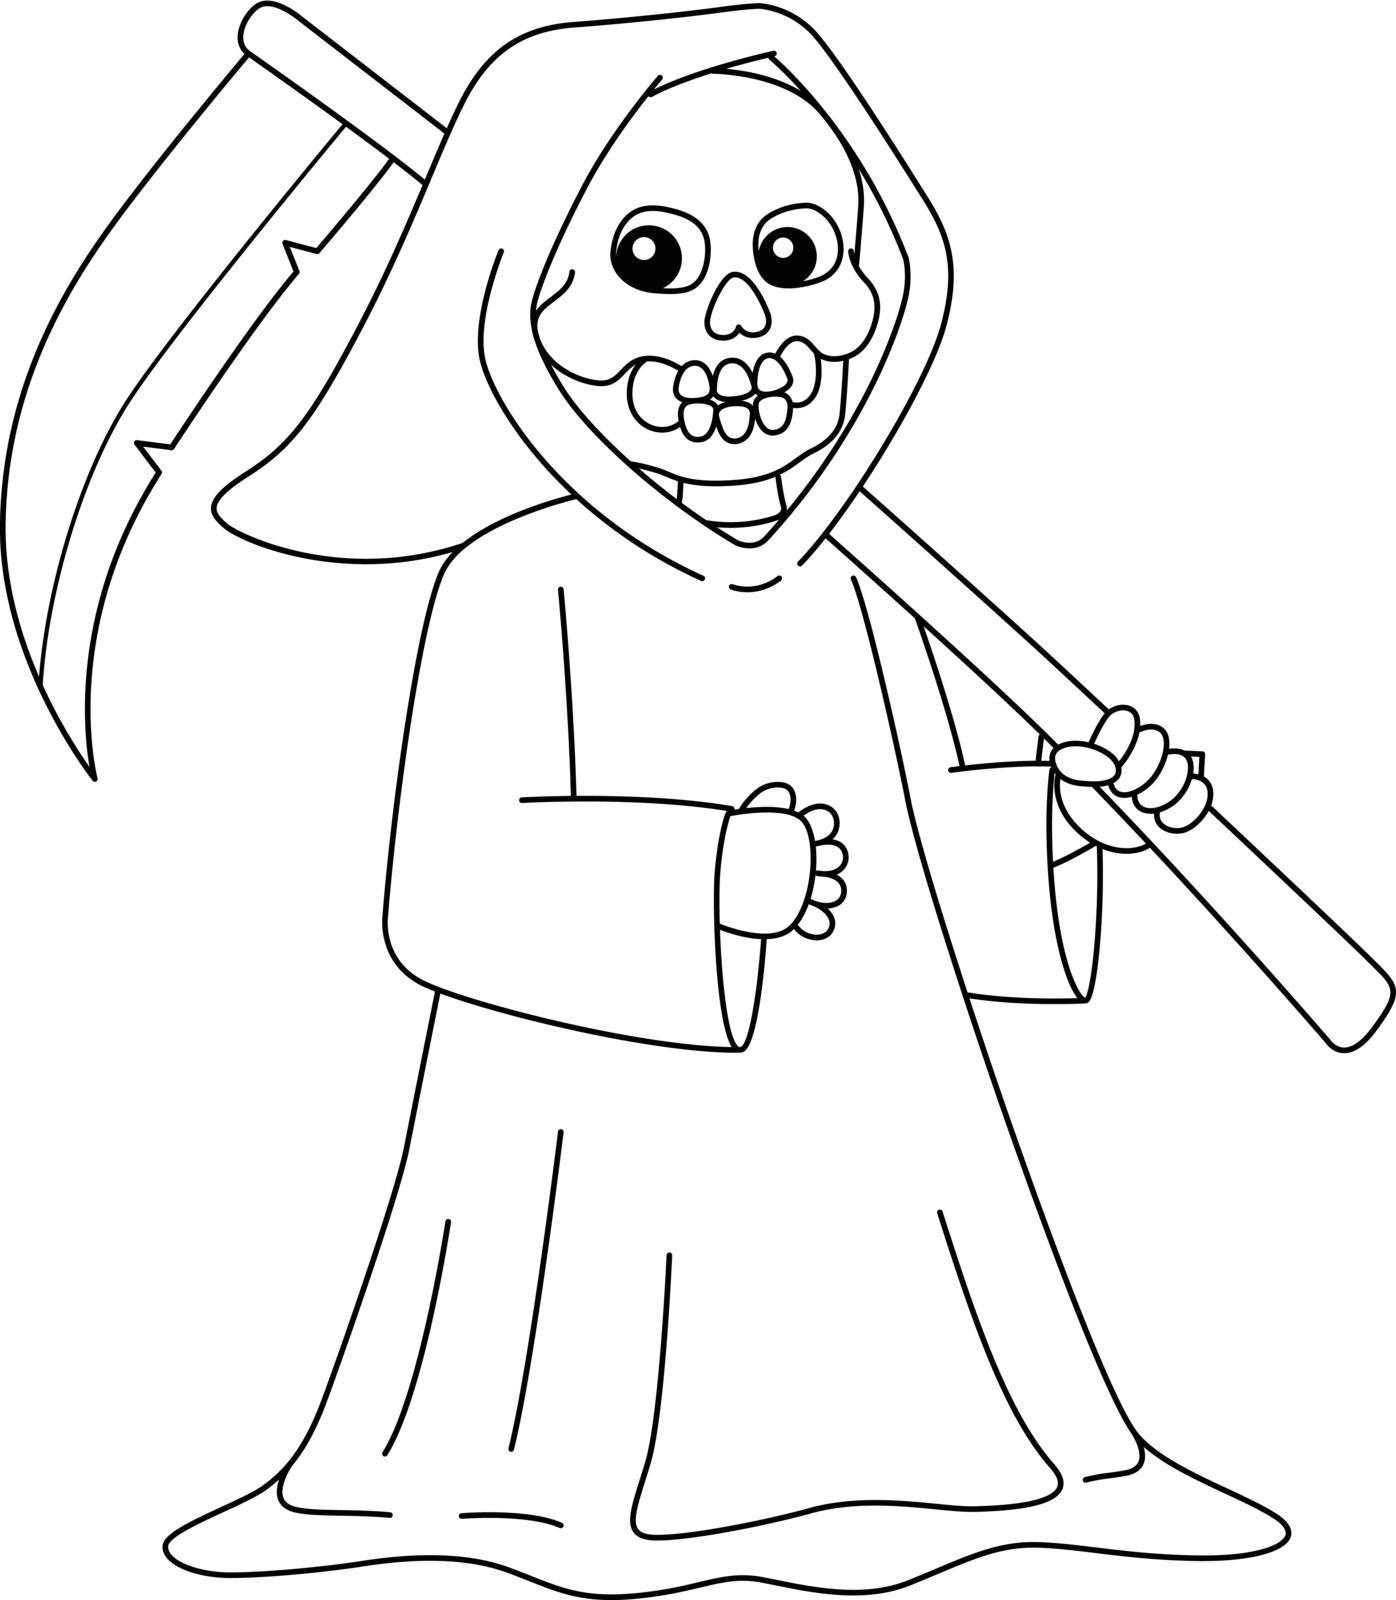 A cute and funny coloring page of a grim reaper. Provides hours of coloring fun for children. To color, this page is very easy. Suitable for little kids and toddlers.